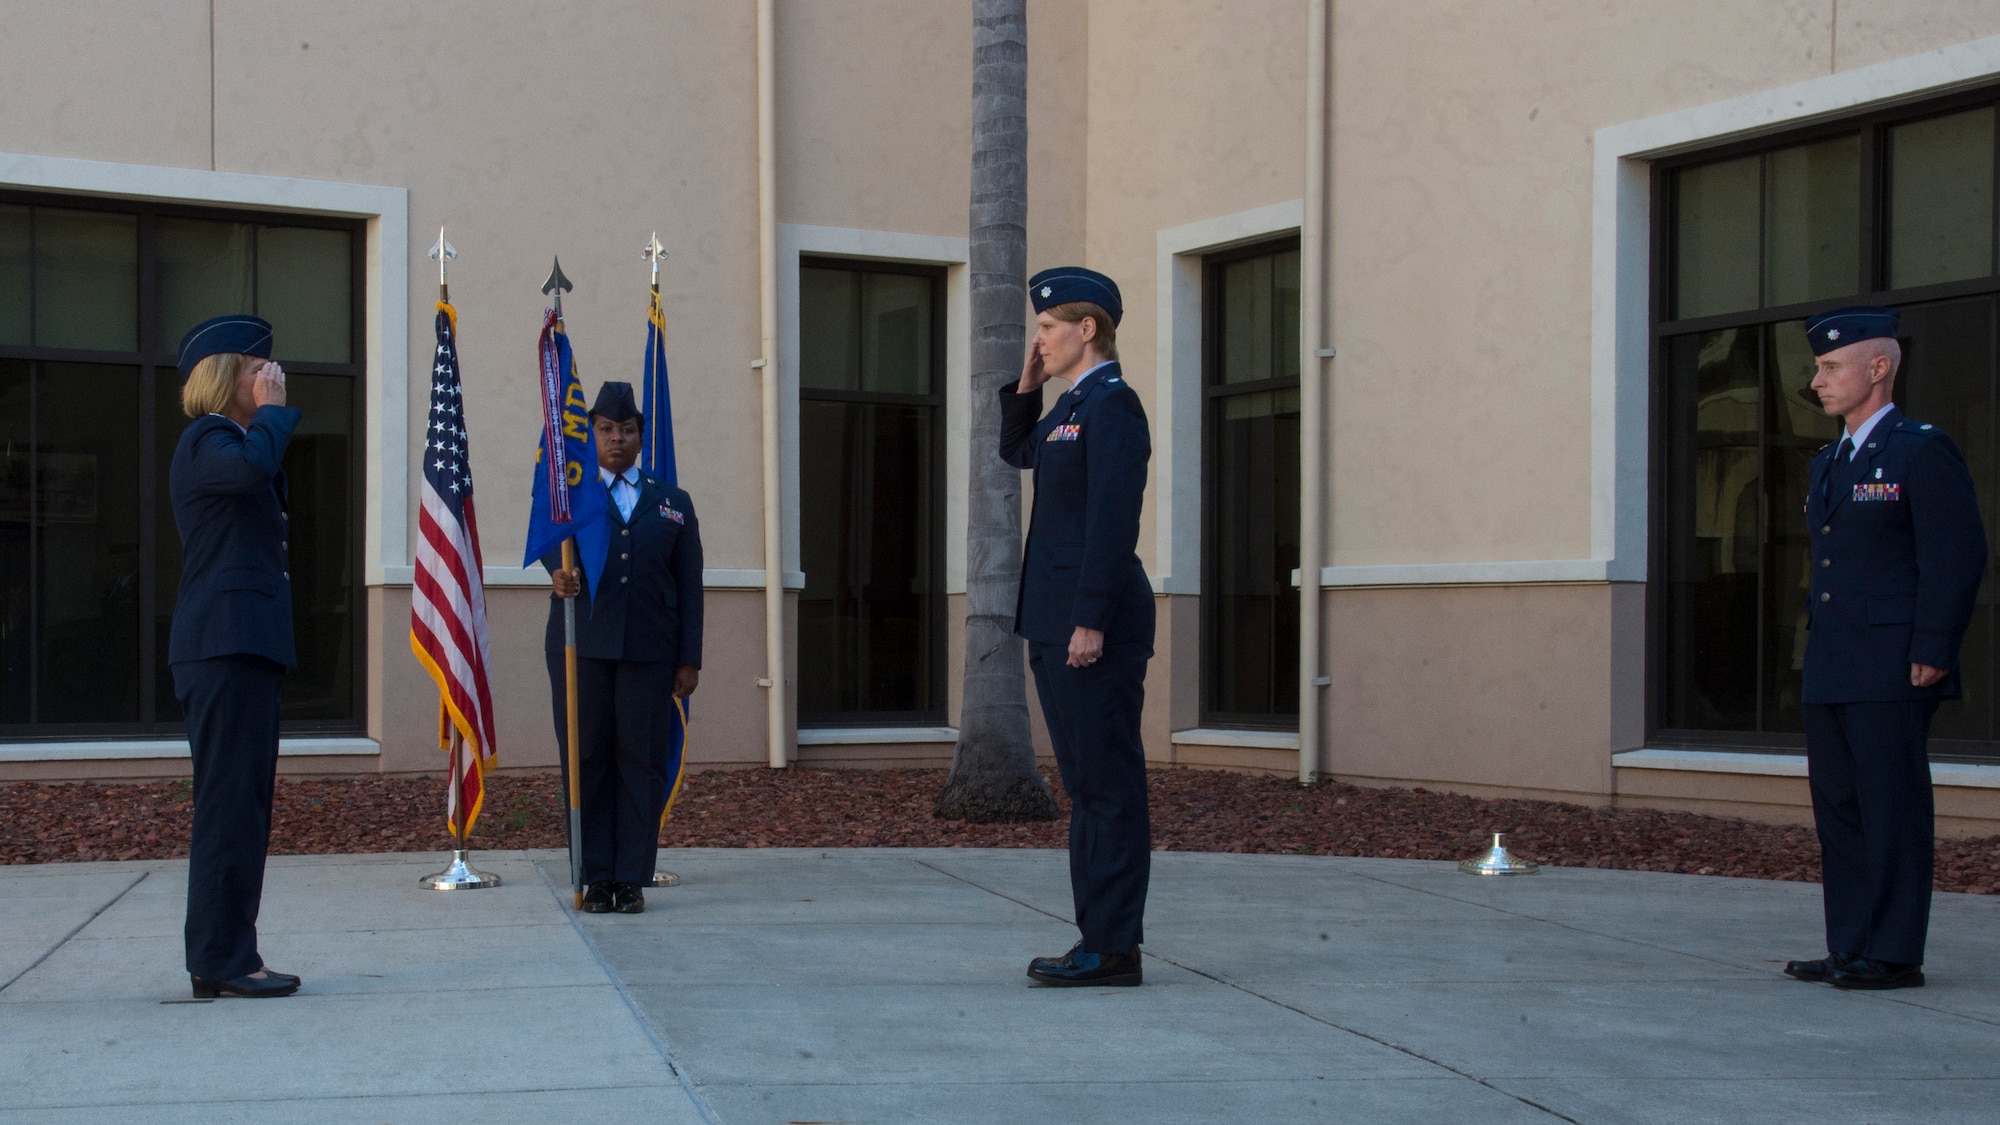 U.S. Air Force Col. Christine Berberick, the 6th Medical Group commander, salutes Lt. Col. Ann McManis, the 6th Medical Support Squadron commander, during a change of command ceremony, June 11, 2020, at MacDill Air Force Base, Fla.